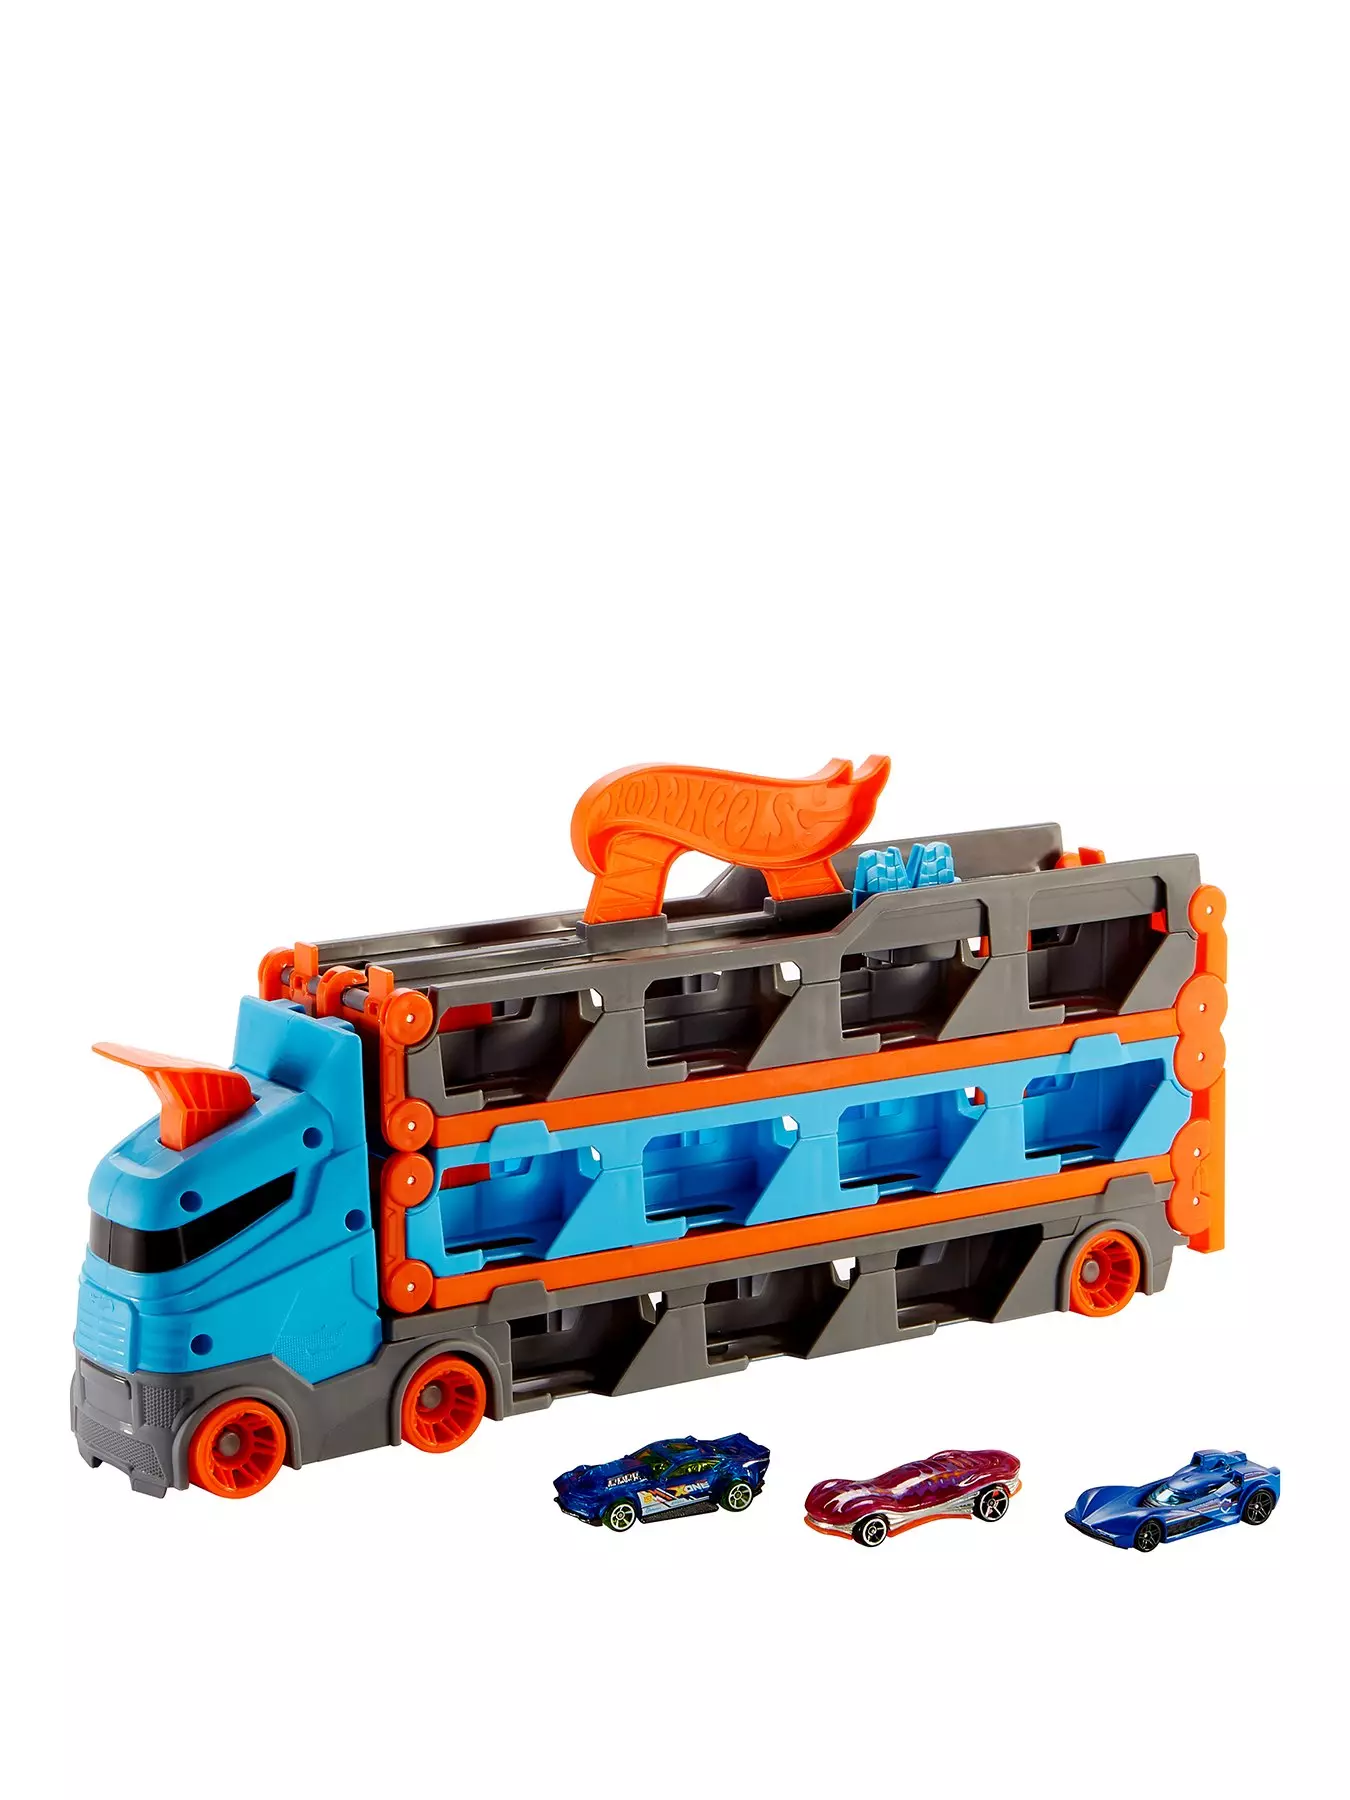  Hot Wheels City Ultimate Garage Playset with 2 Die-Cast Cars,  Toy Storage for 50+ 1:64 Scale Cars, 4 Levels of Track Play, Defeat The  Dragon : Everything Else